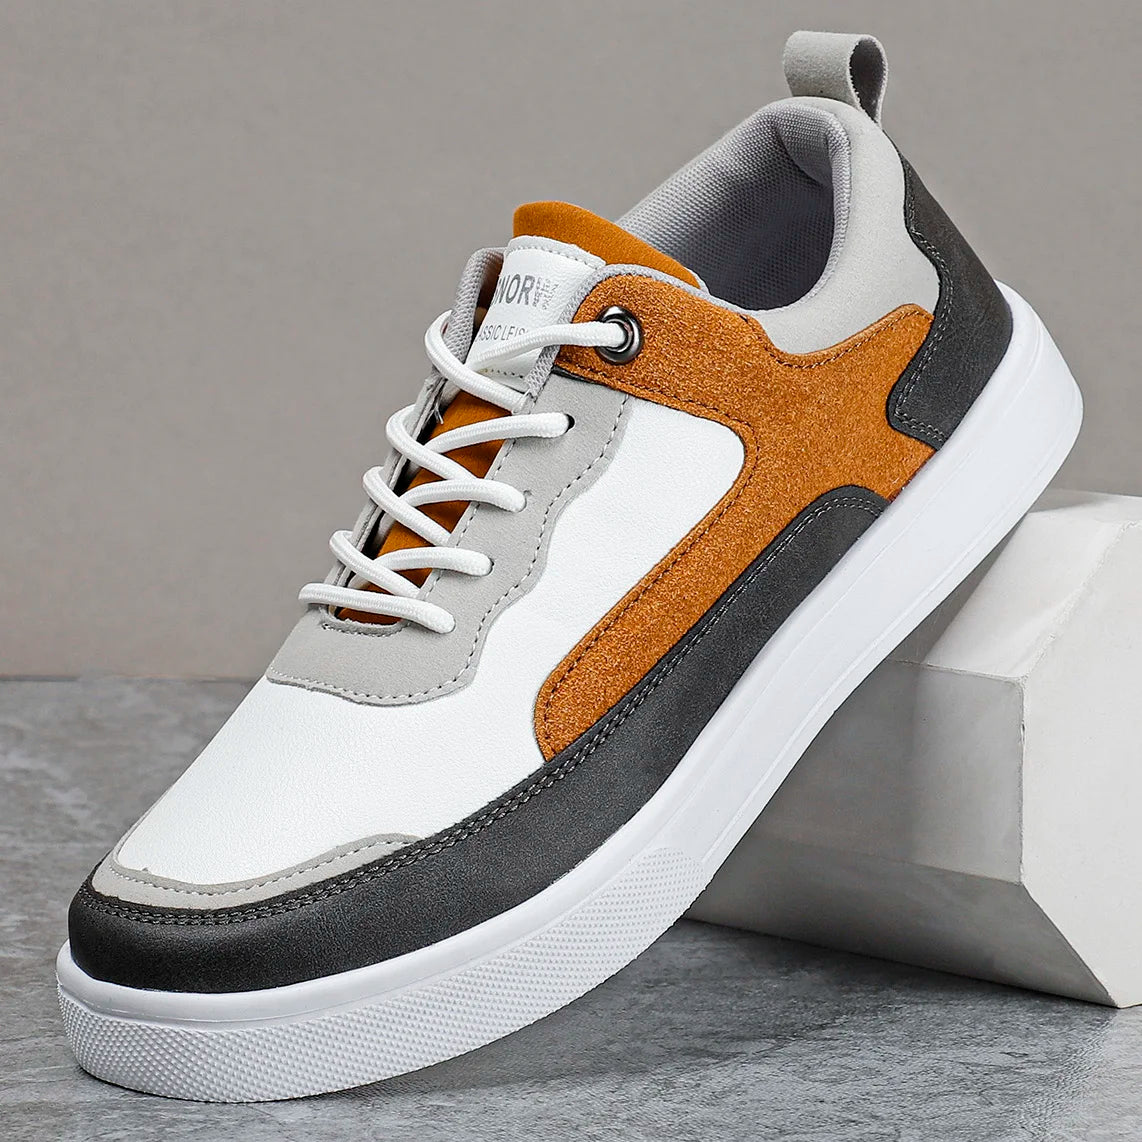 Men Fashion White Leather Sneakers Tenis Casual Shoes